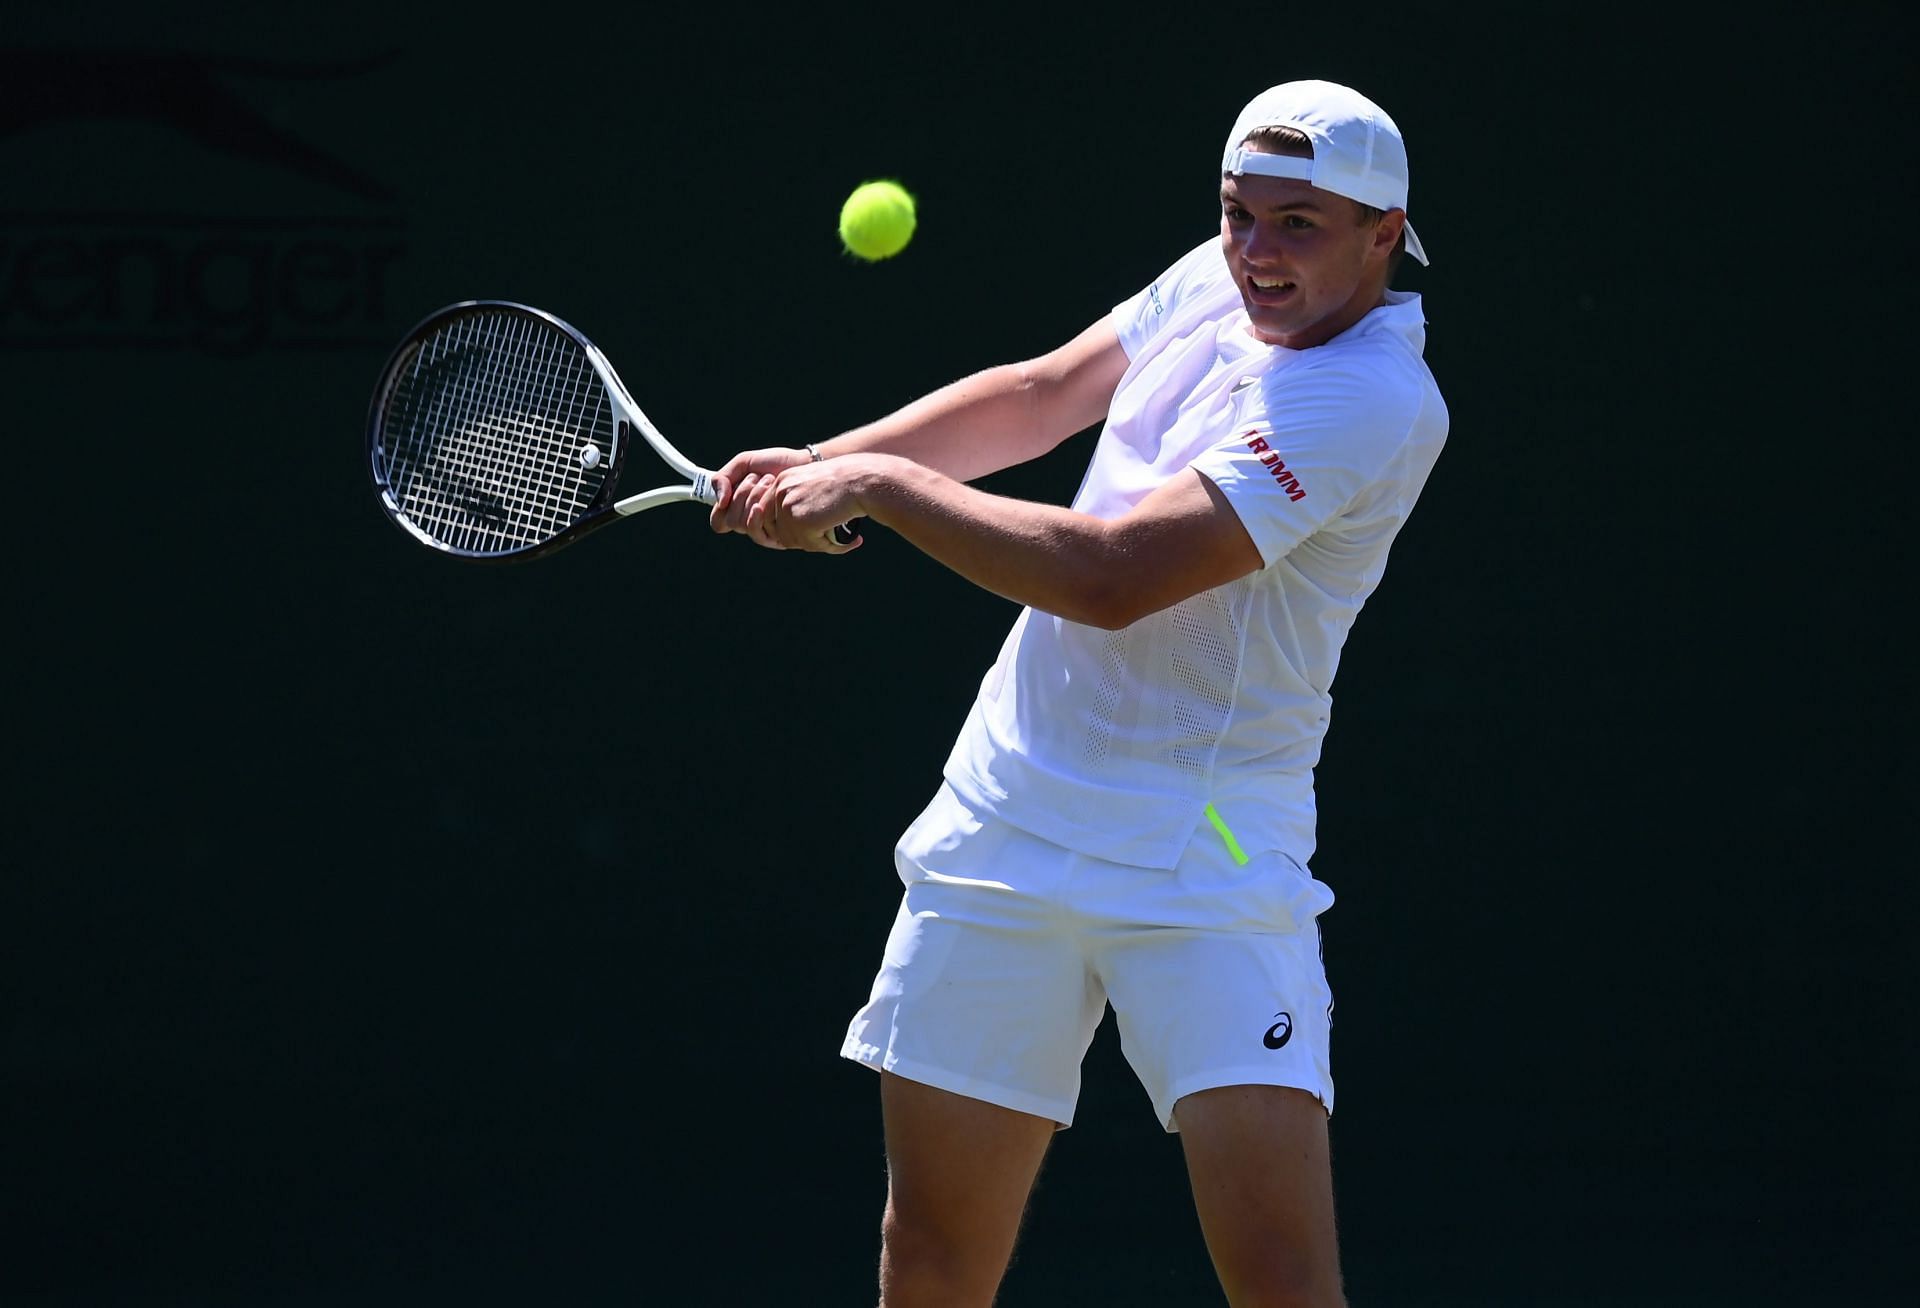 Dominic Stricker at the Wimbledon Championships Qualifying 